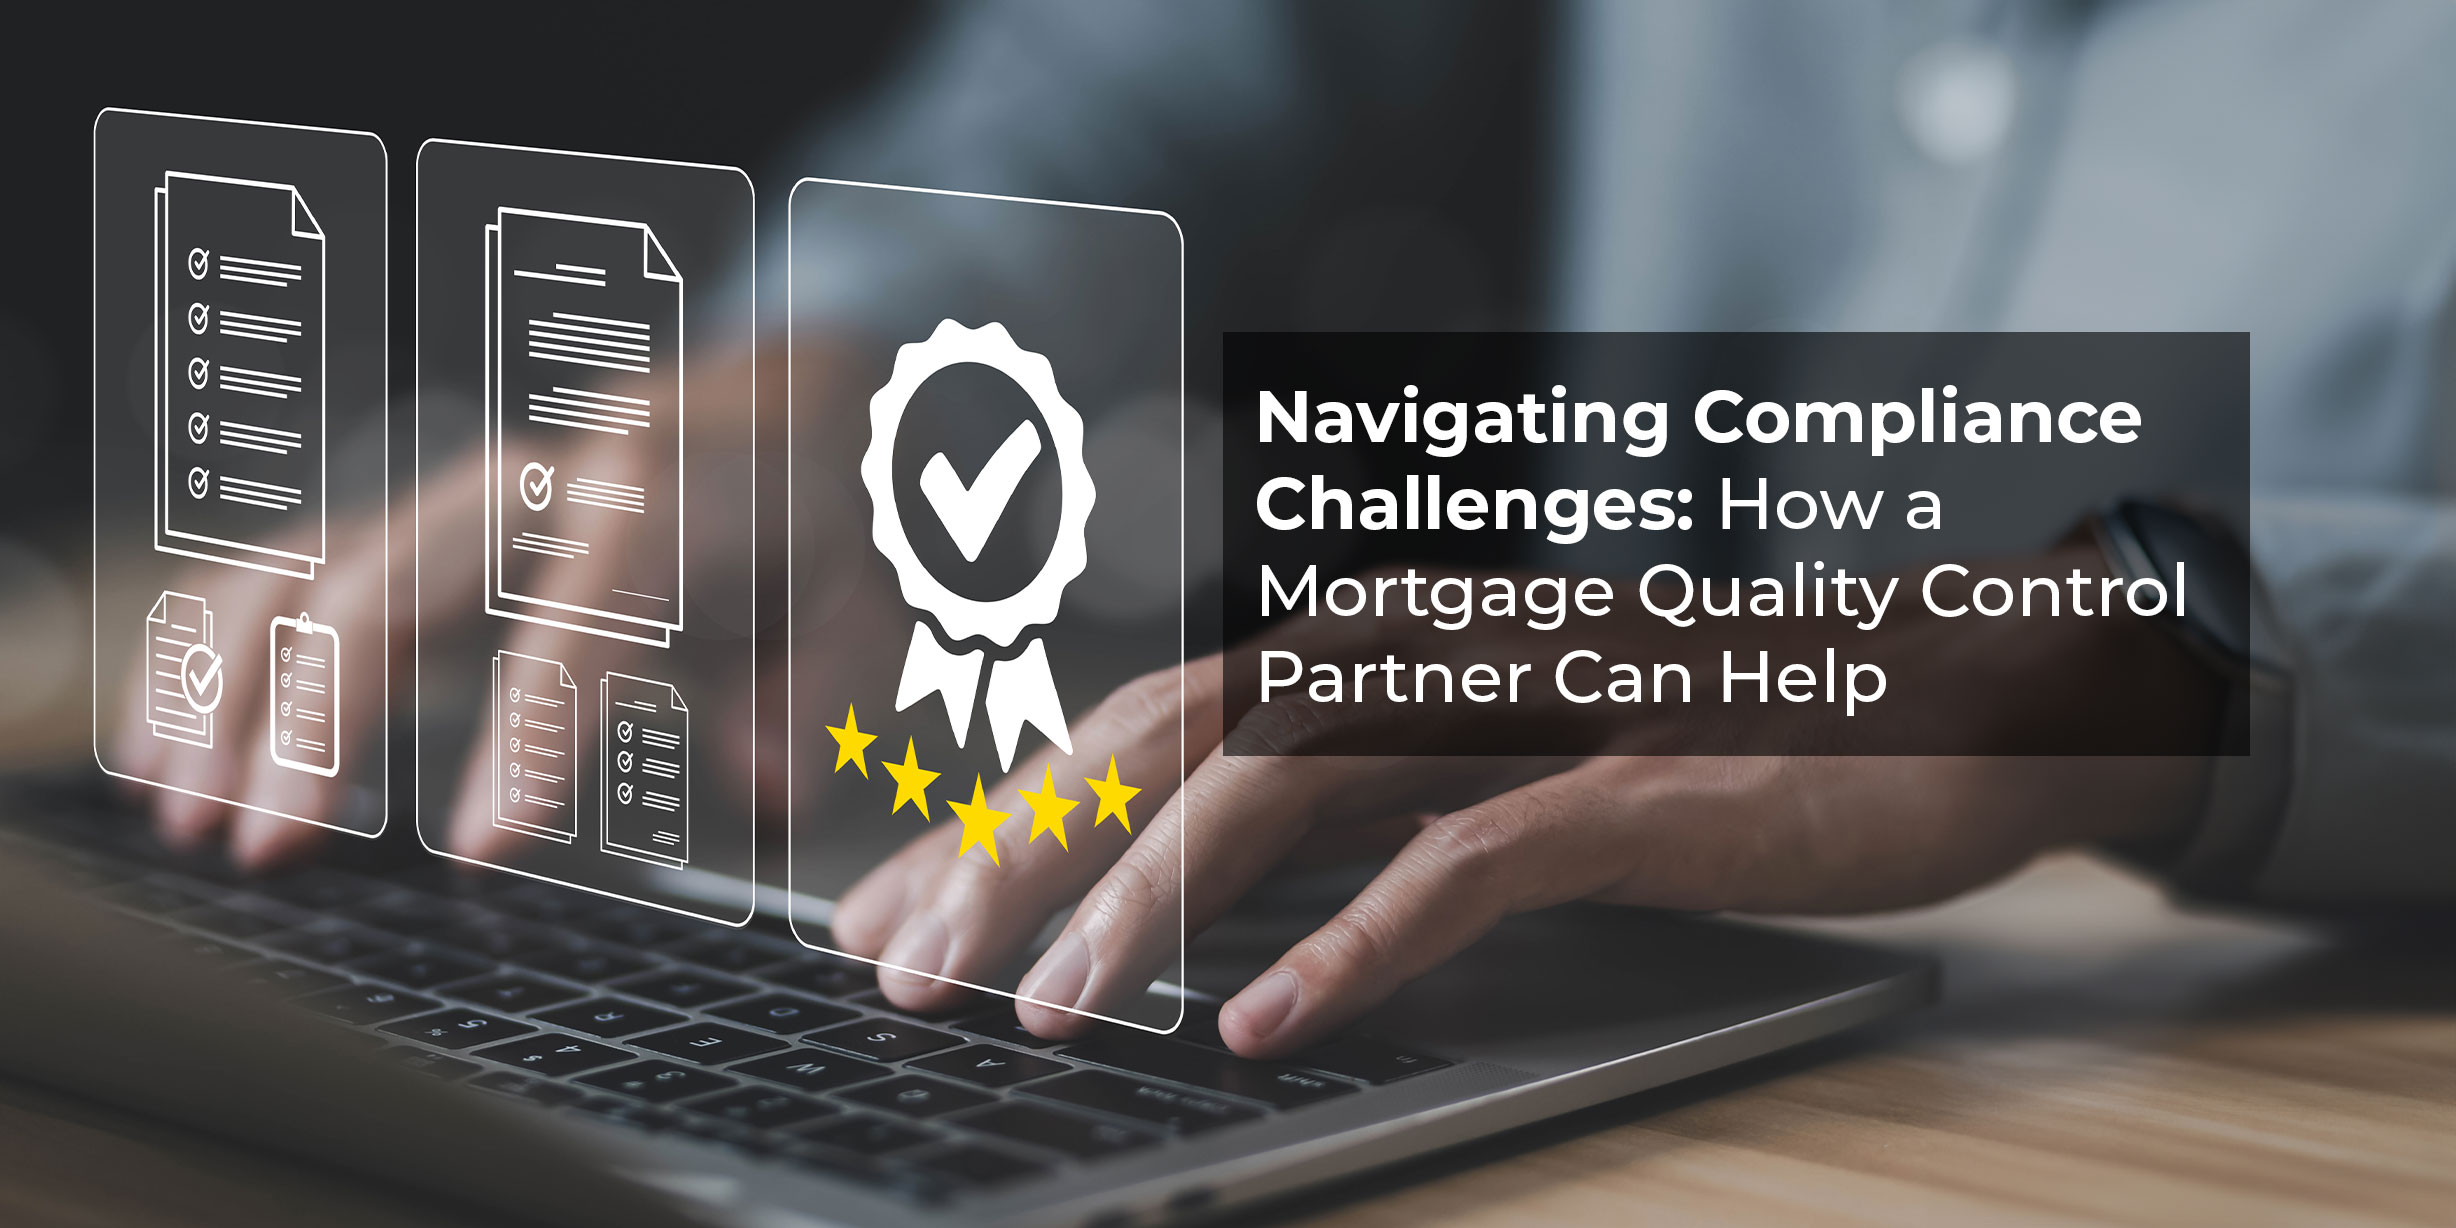 Navigating Compliance Challenges: How a Mortgage Quality Control Partner Can Help